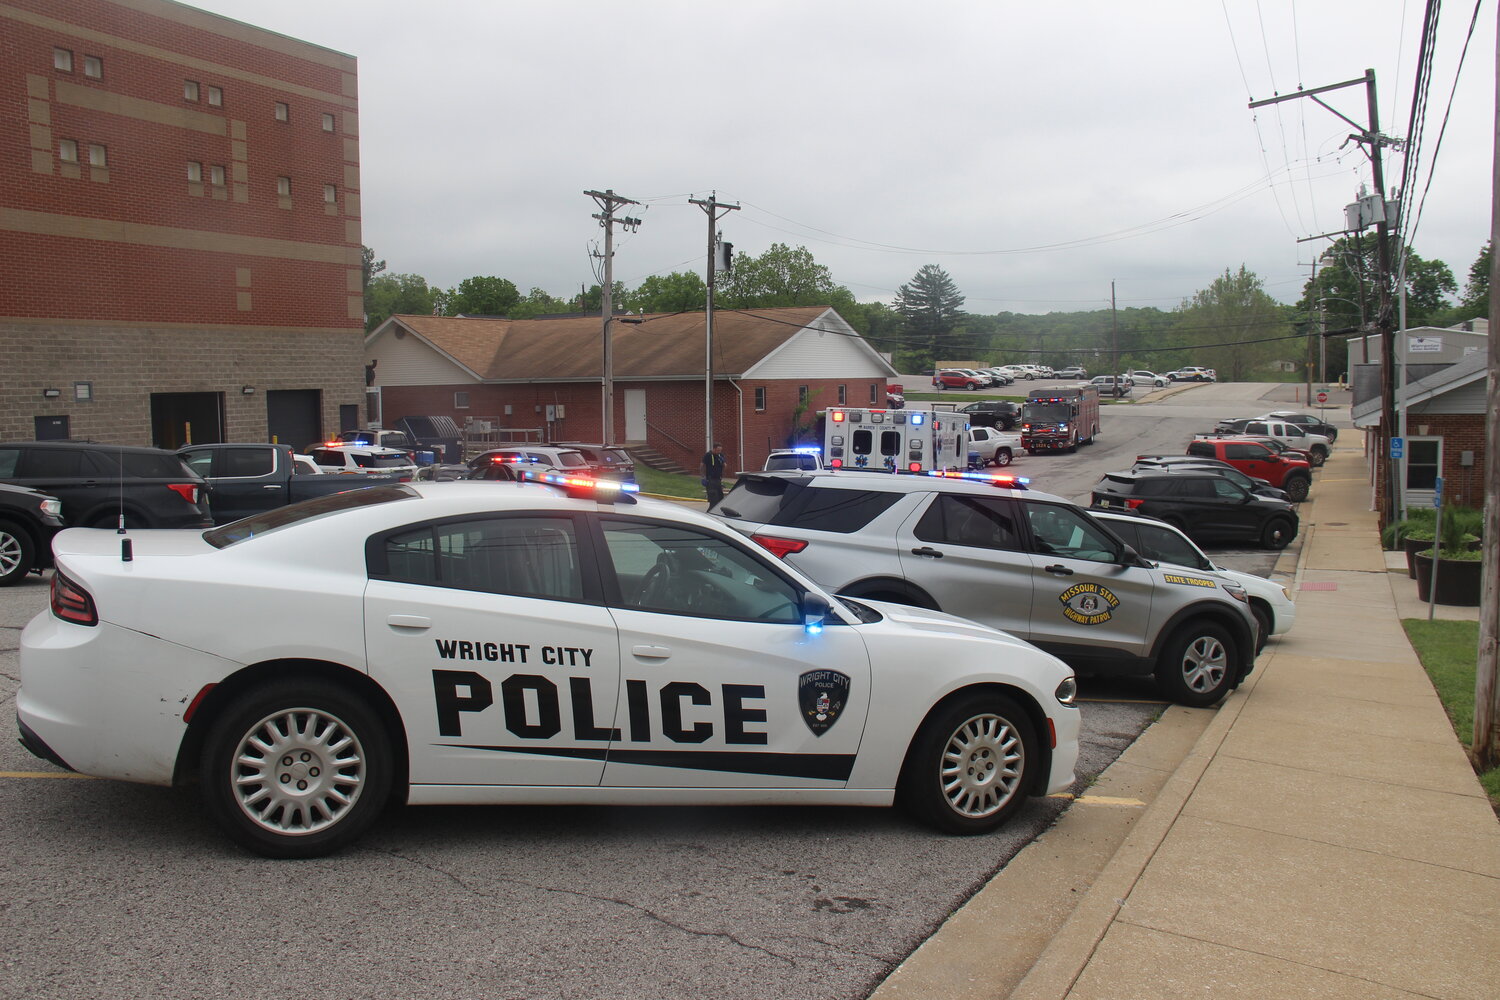 Officers from multiple agencies descended on the Warren County Jail on May 16 after an altercation with an inmate left a jailer injured.